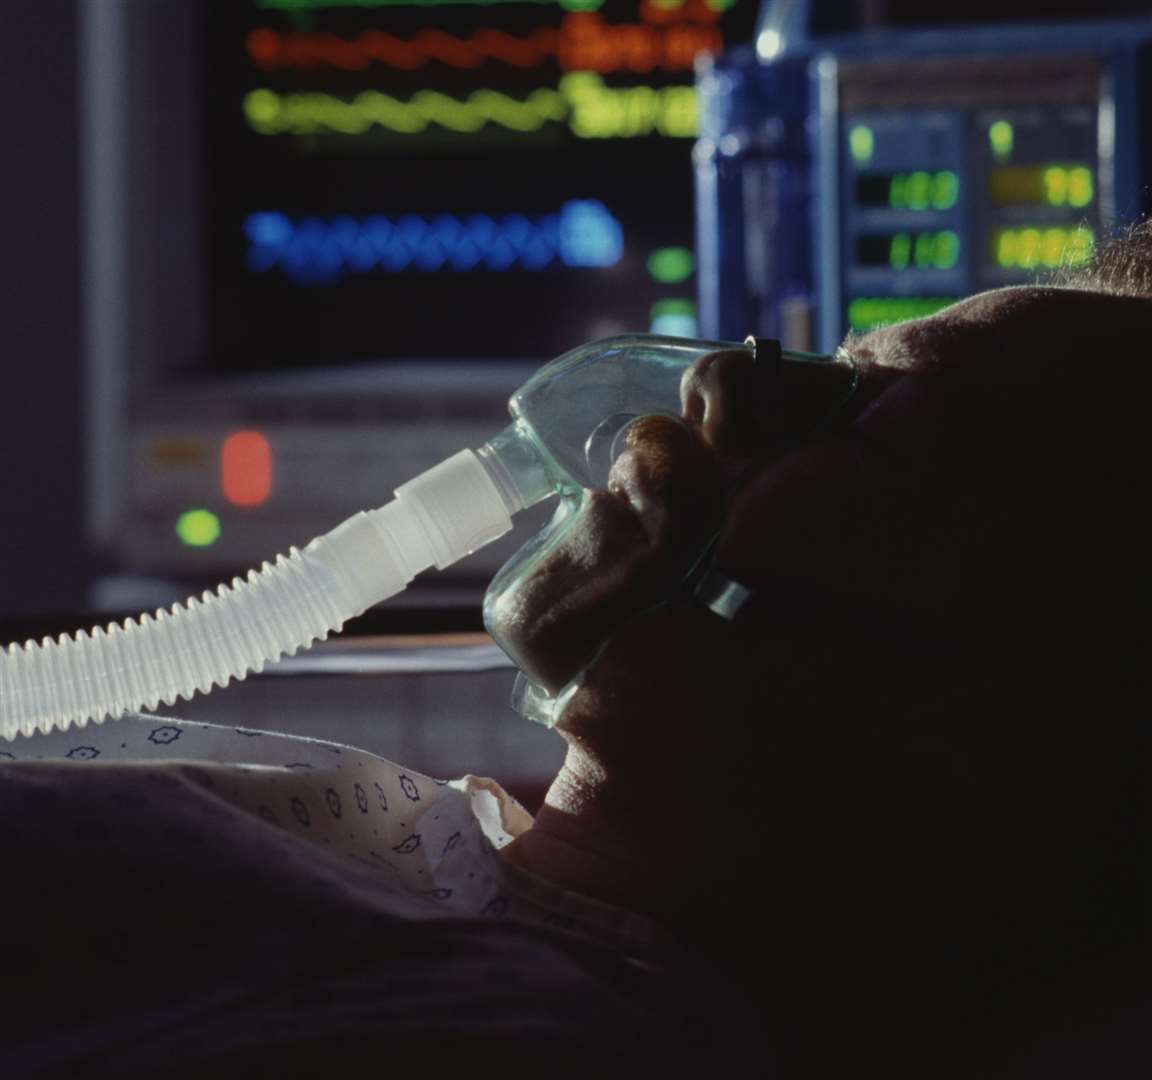 The number of patients currently requiring a ventilator is 10 across the county. Stock image.